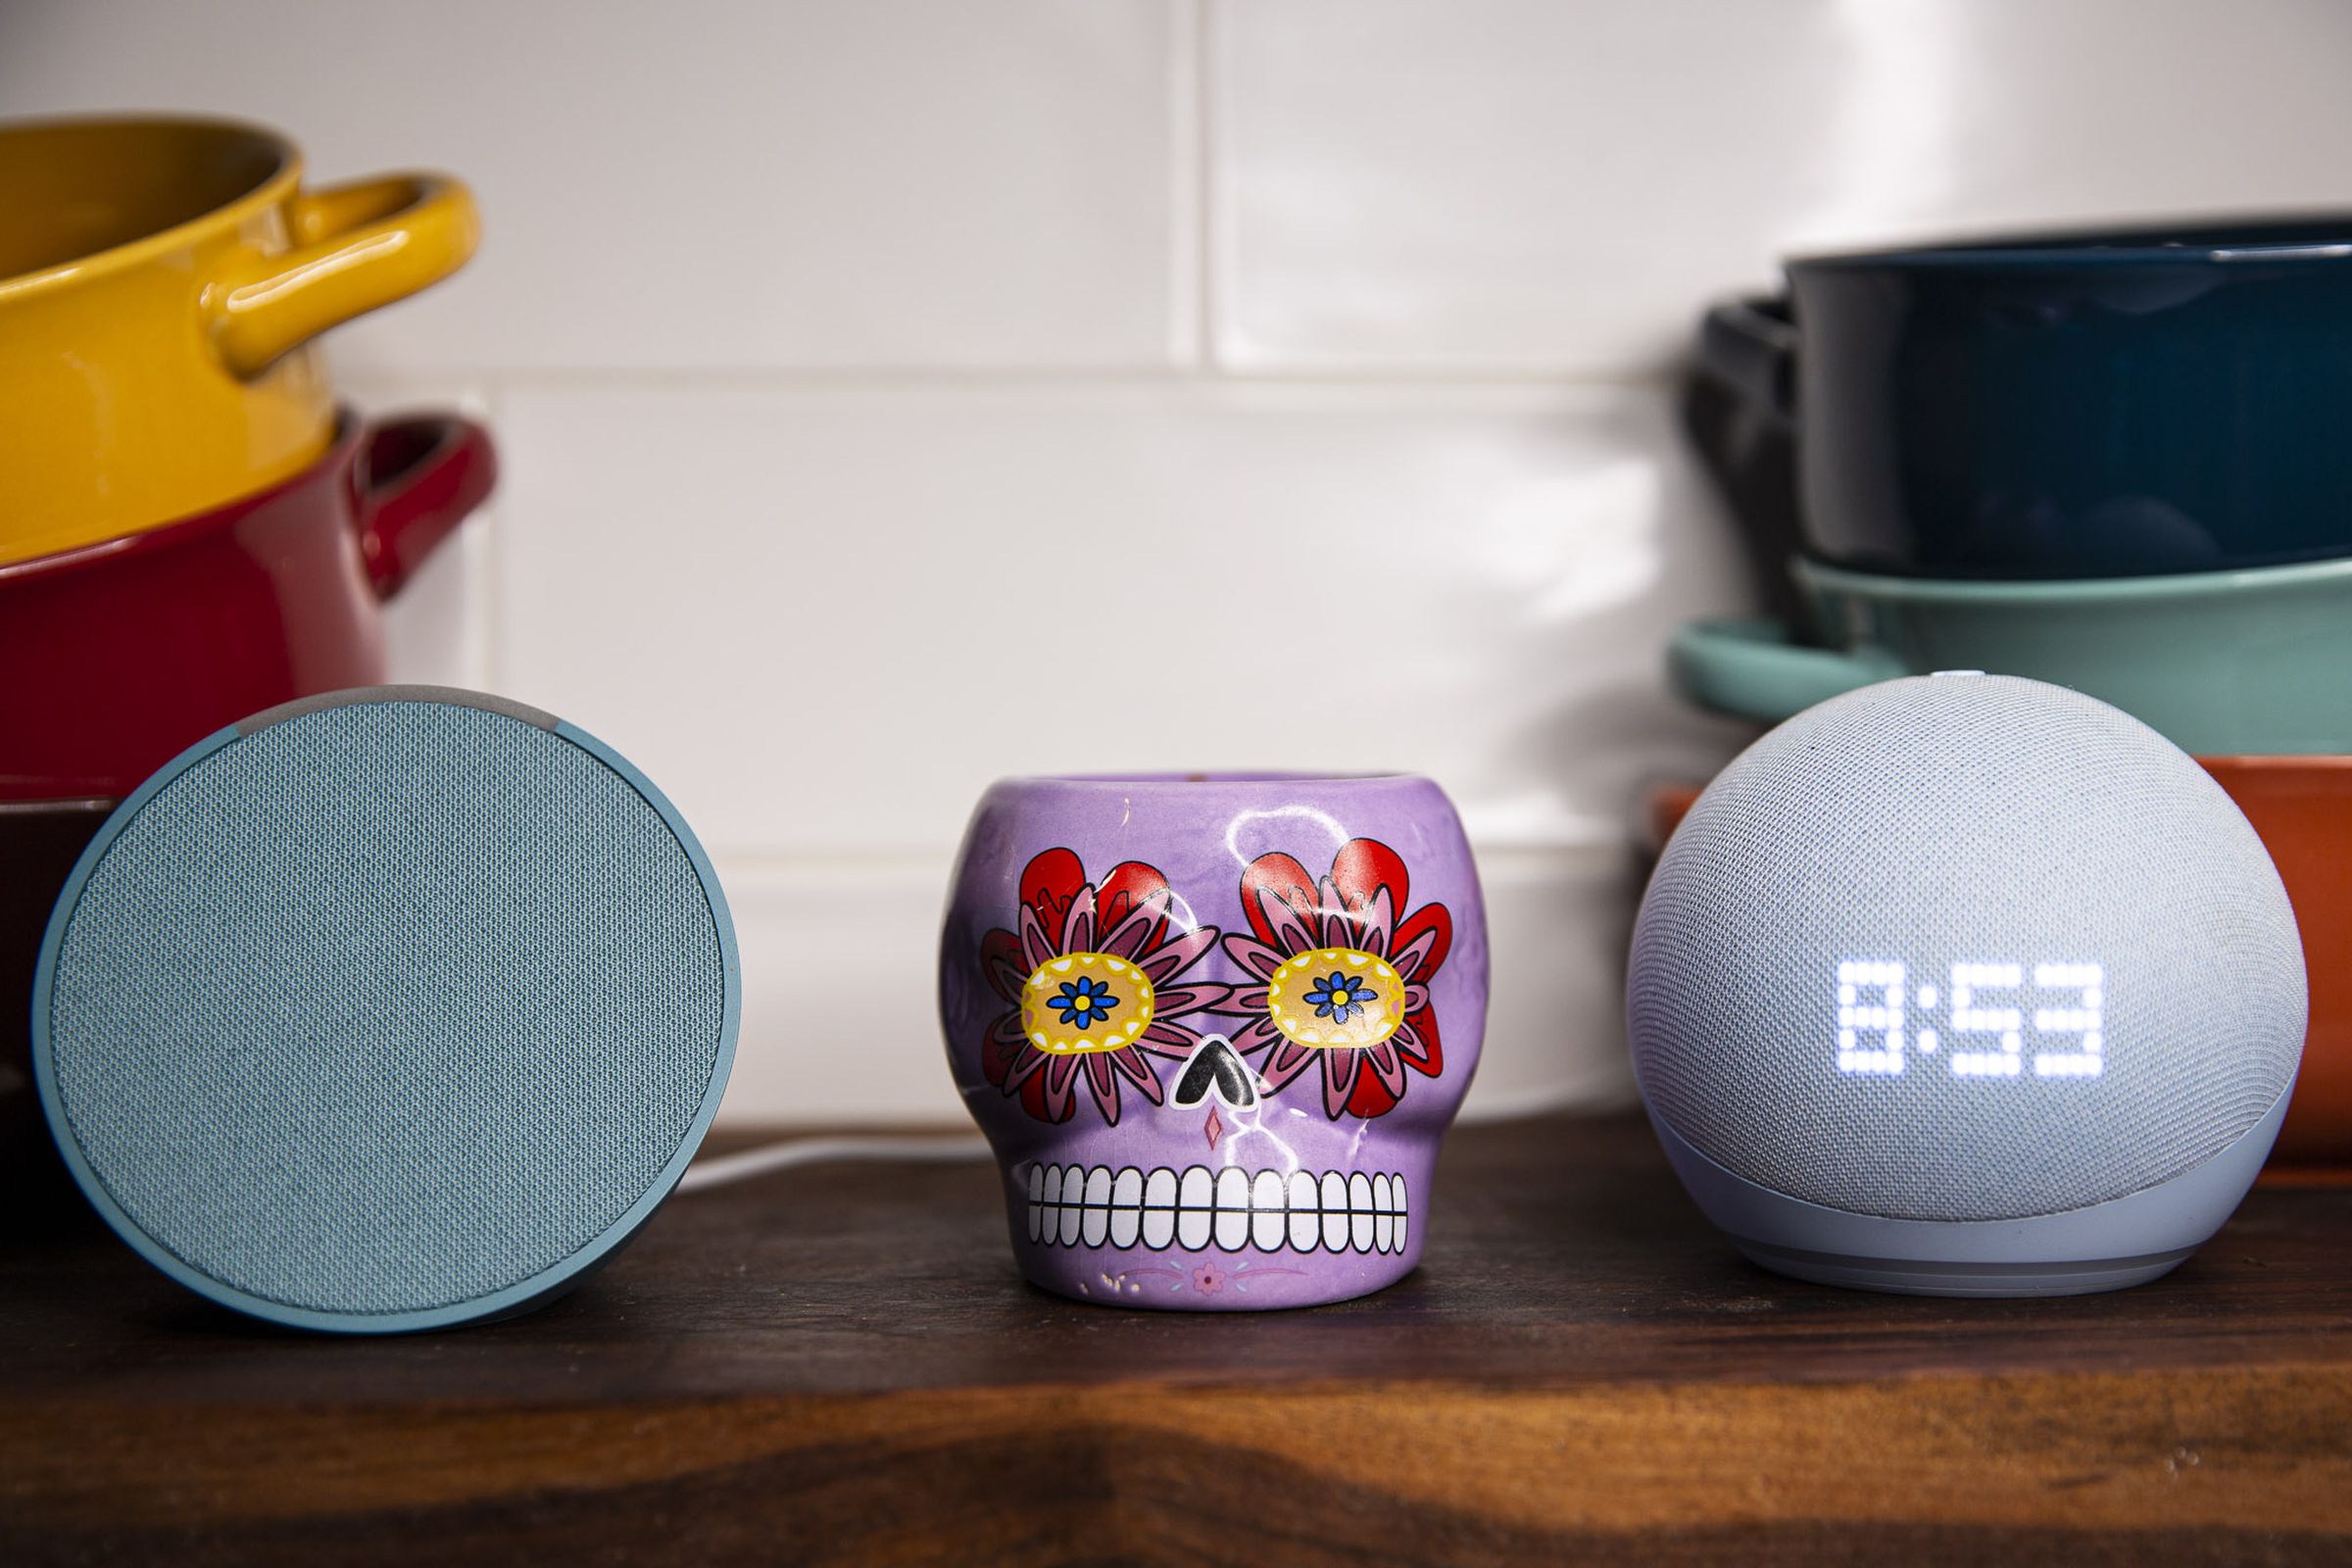 An Amazon Echo Pop (pictured left) and the fifth-generation Echo Dot (right).